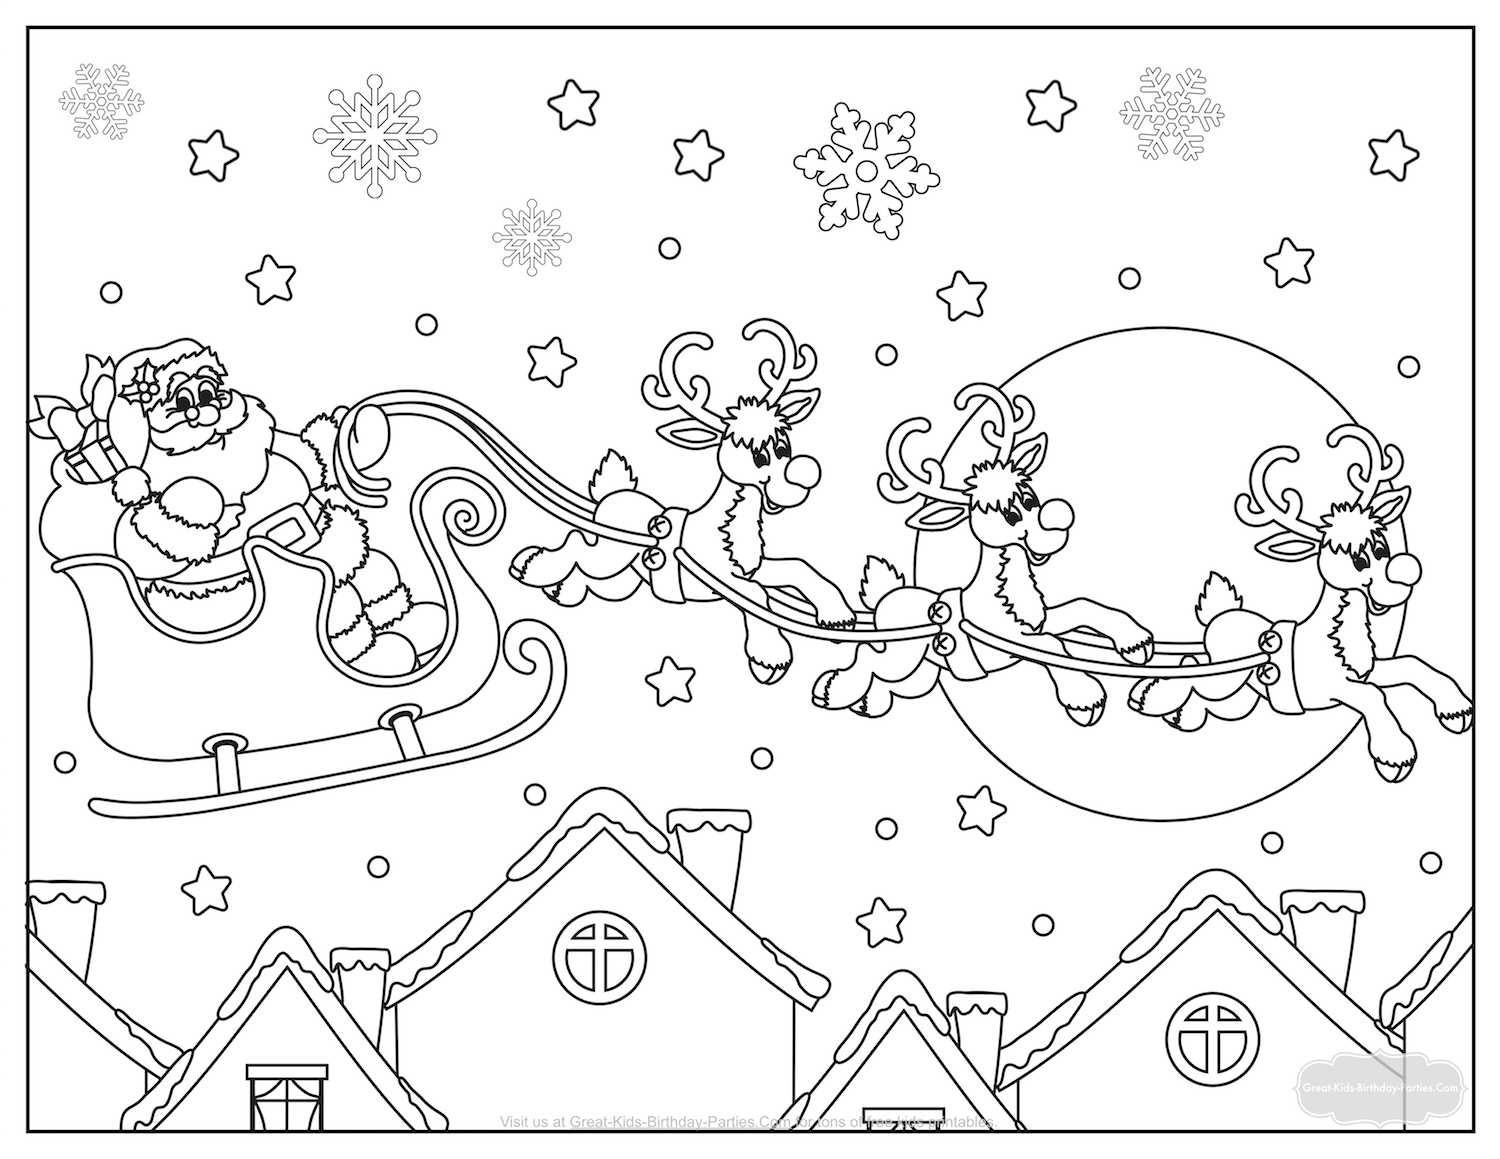 Coloring Pages : Free Santa Sleigh Pattern Printable Sled Coloring Page  Reindeer Wood Wooden One Outstanding Santa Sleigh Coloring Page ~ Ny19 Votes